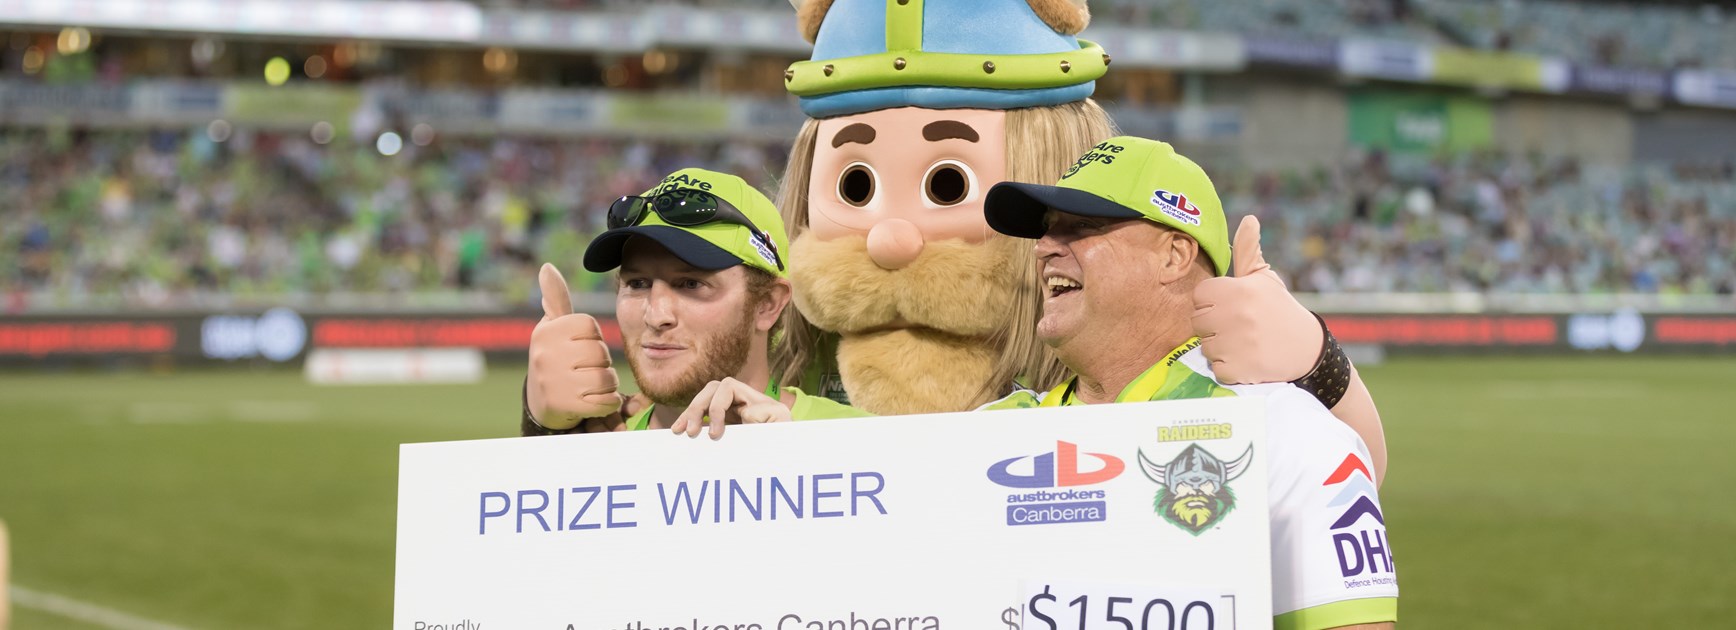 Austbrokers Canberra letting Raiders fans Cash-In!